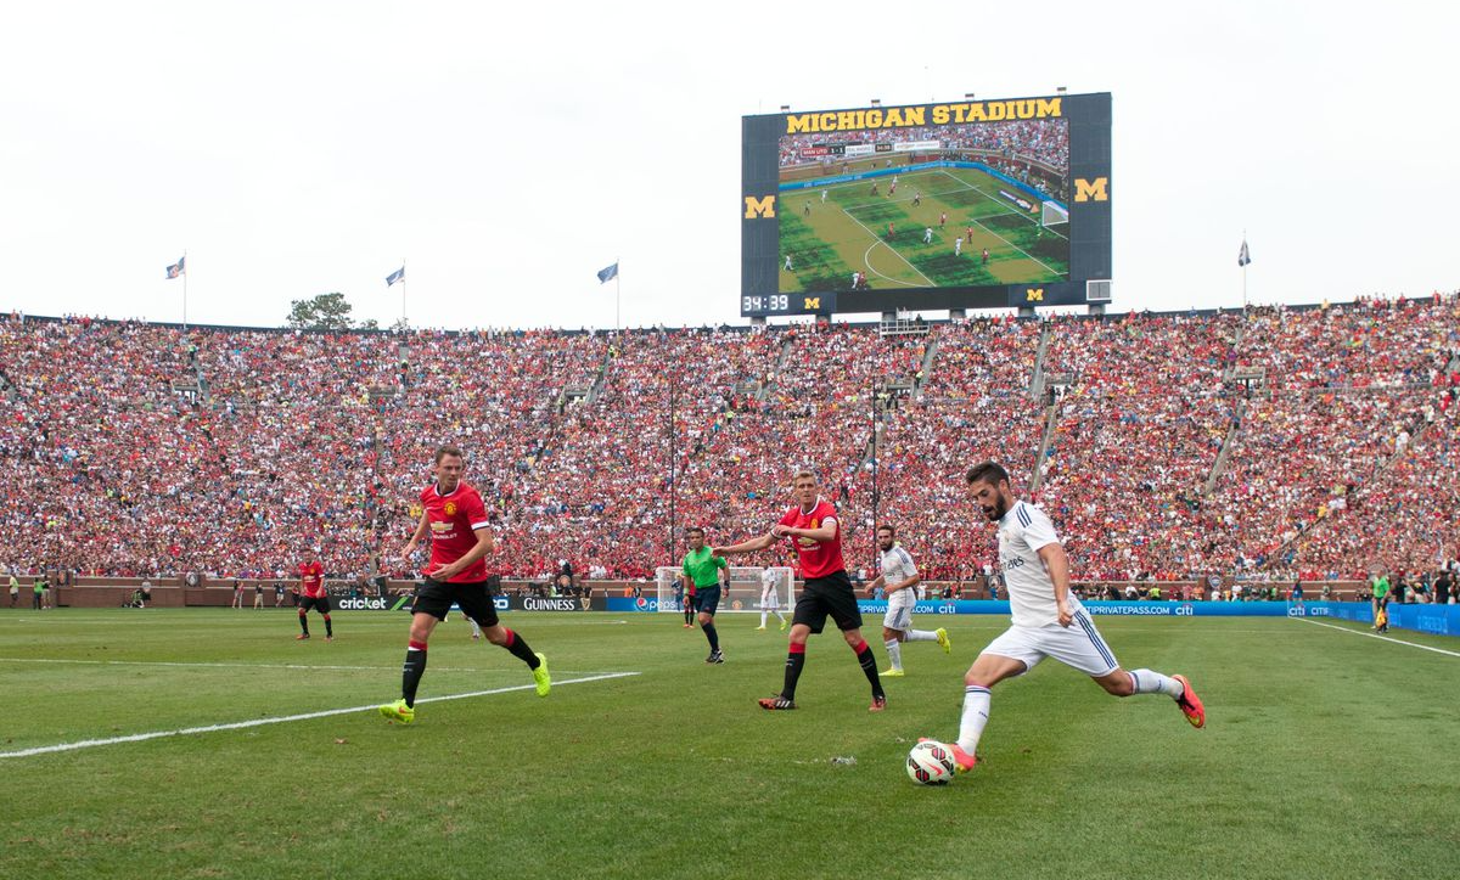 Most-Attended Soccer Games in U.S. History